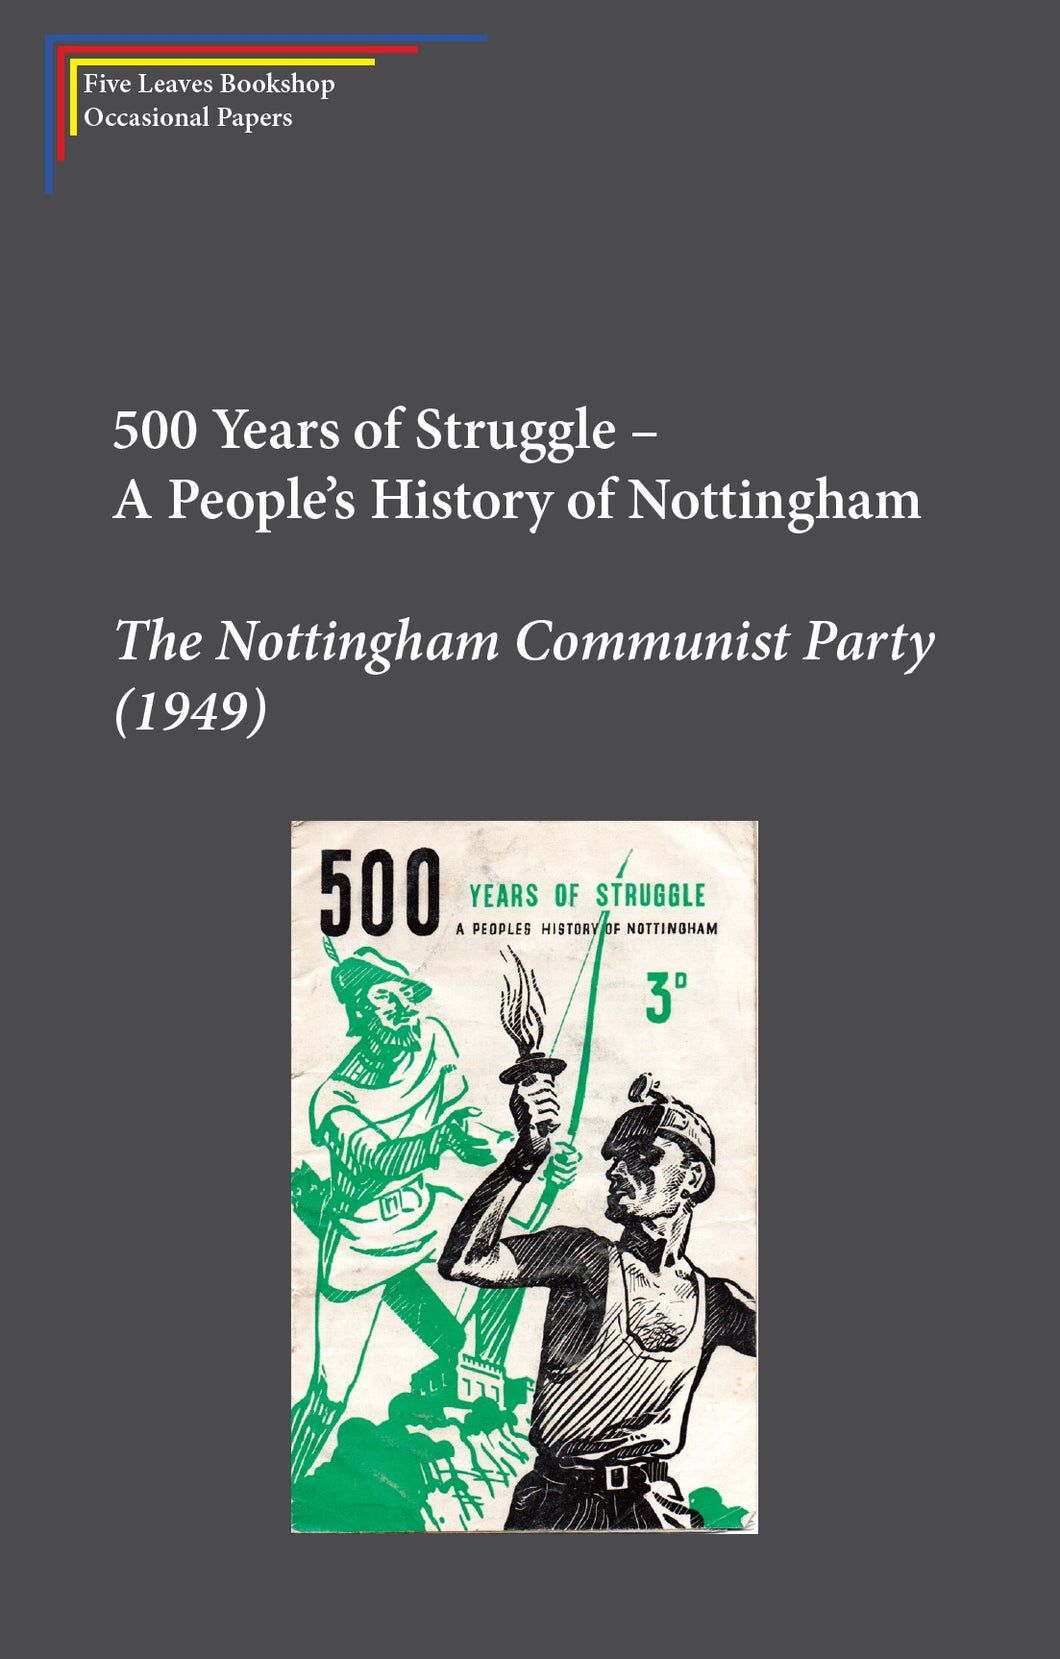 500 Years of Struggle: A People’s History of Nottingham